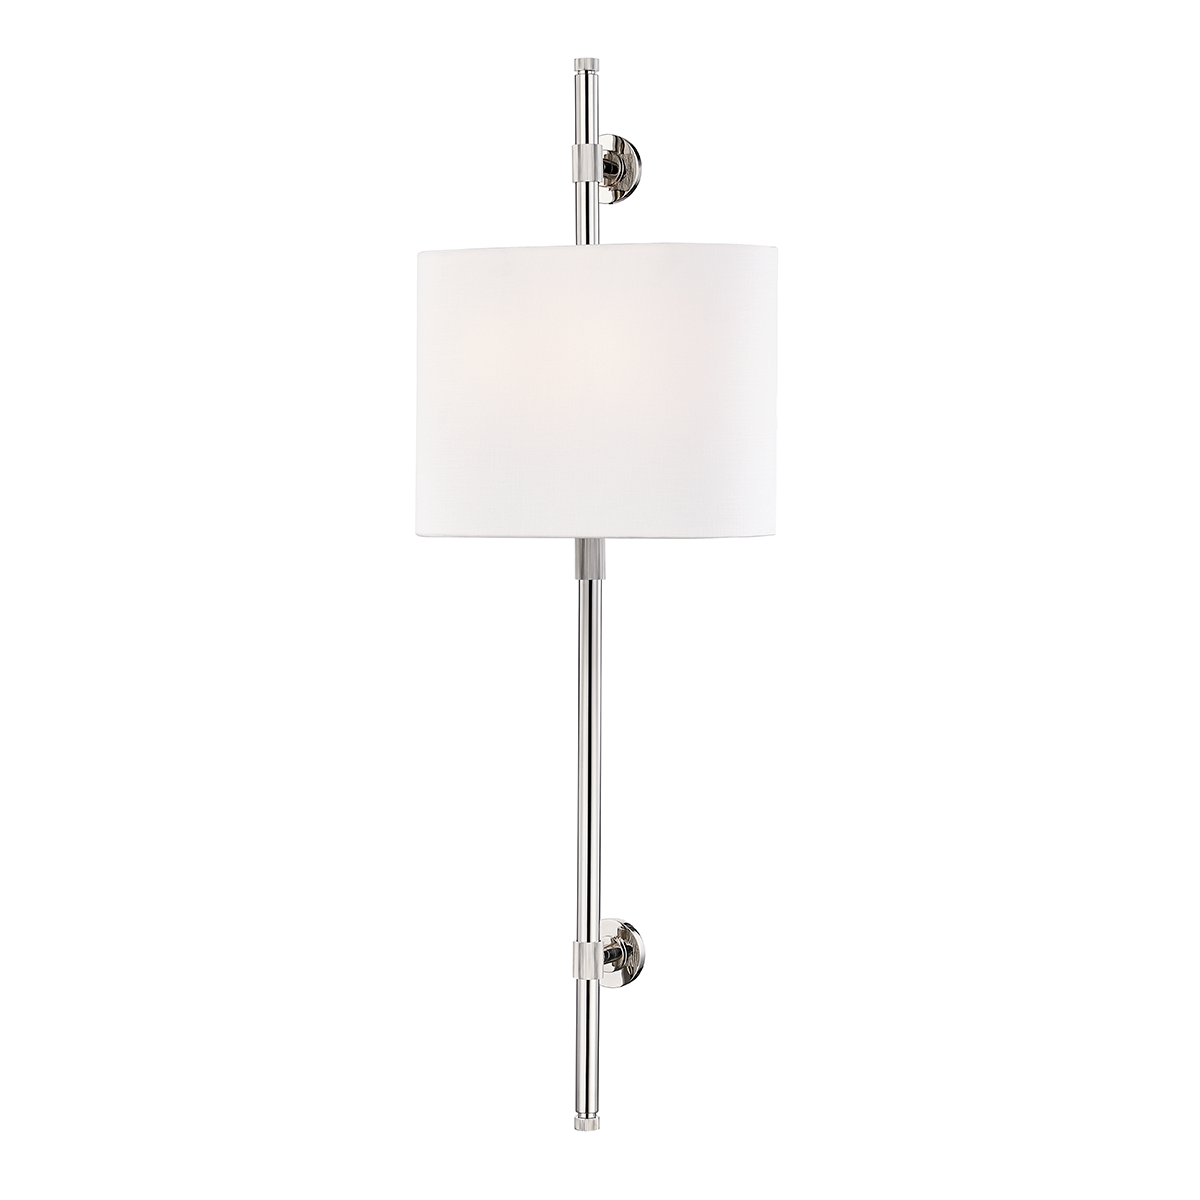 Hudson Valley Lighting Bowery Wall Sconce in Polished Steel with Two Lights